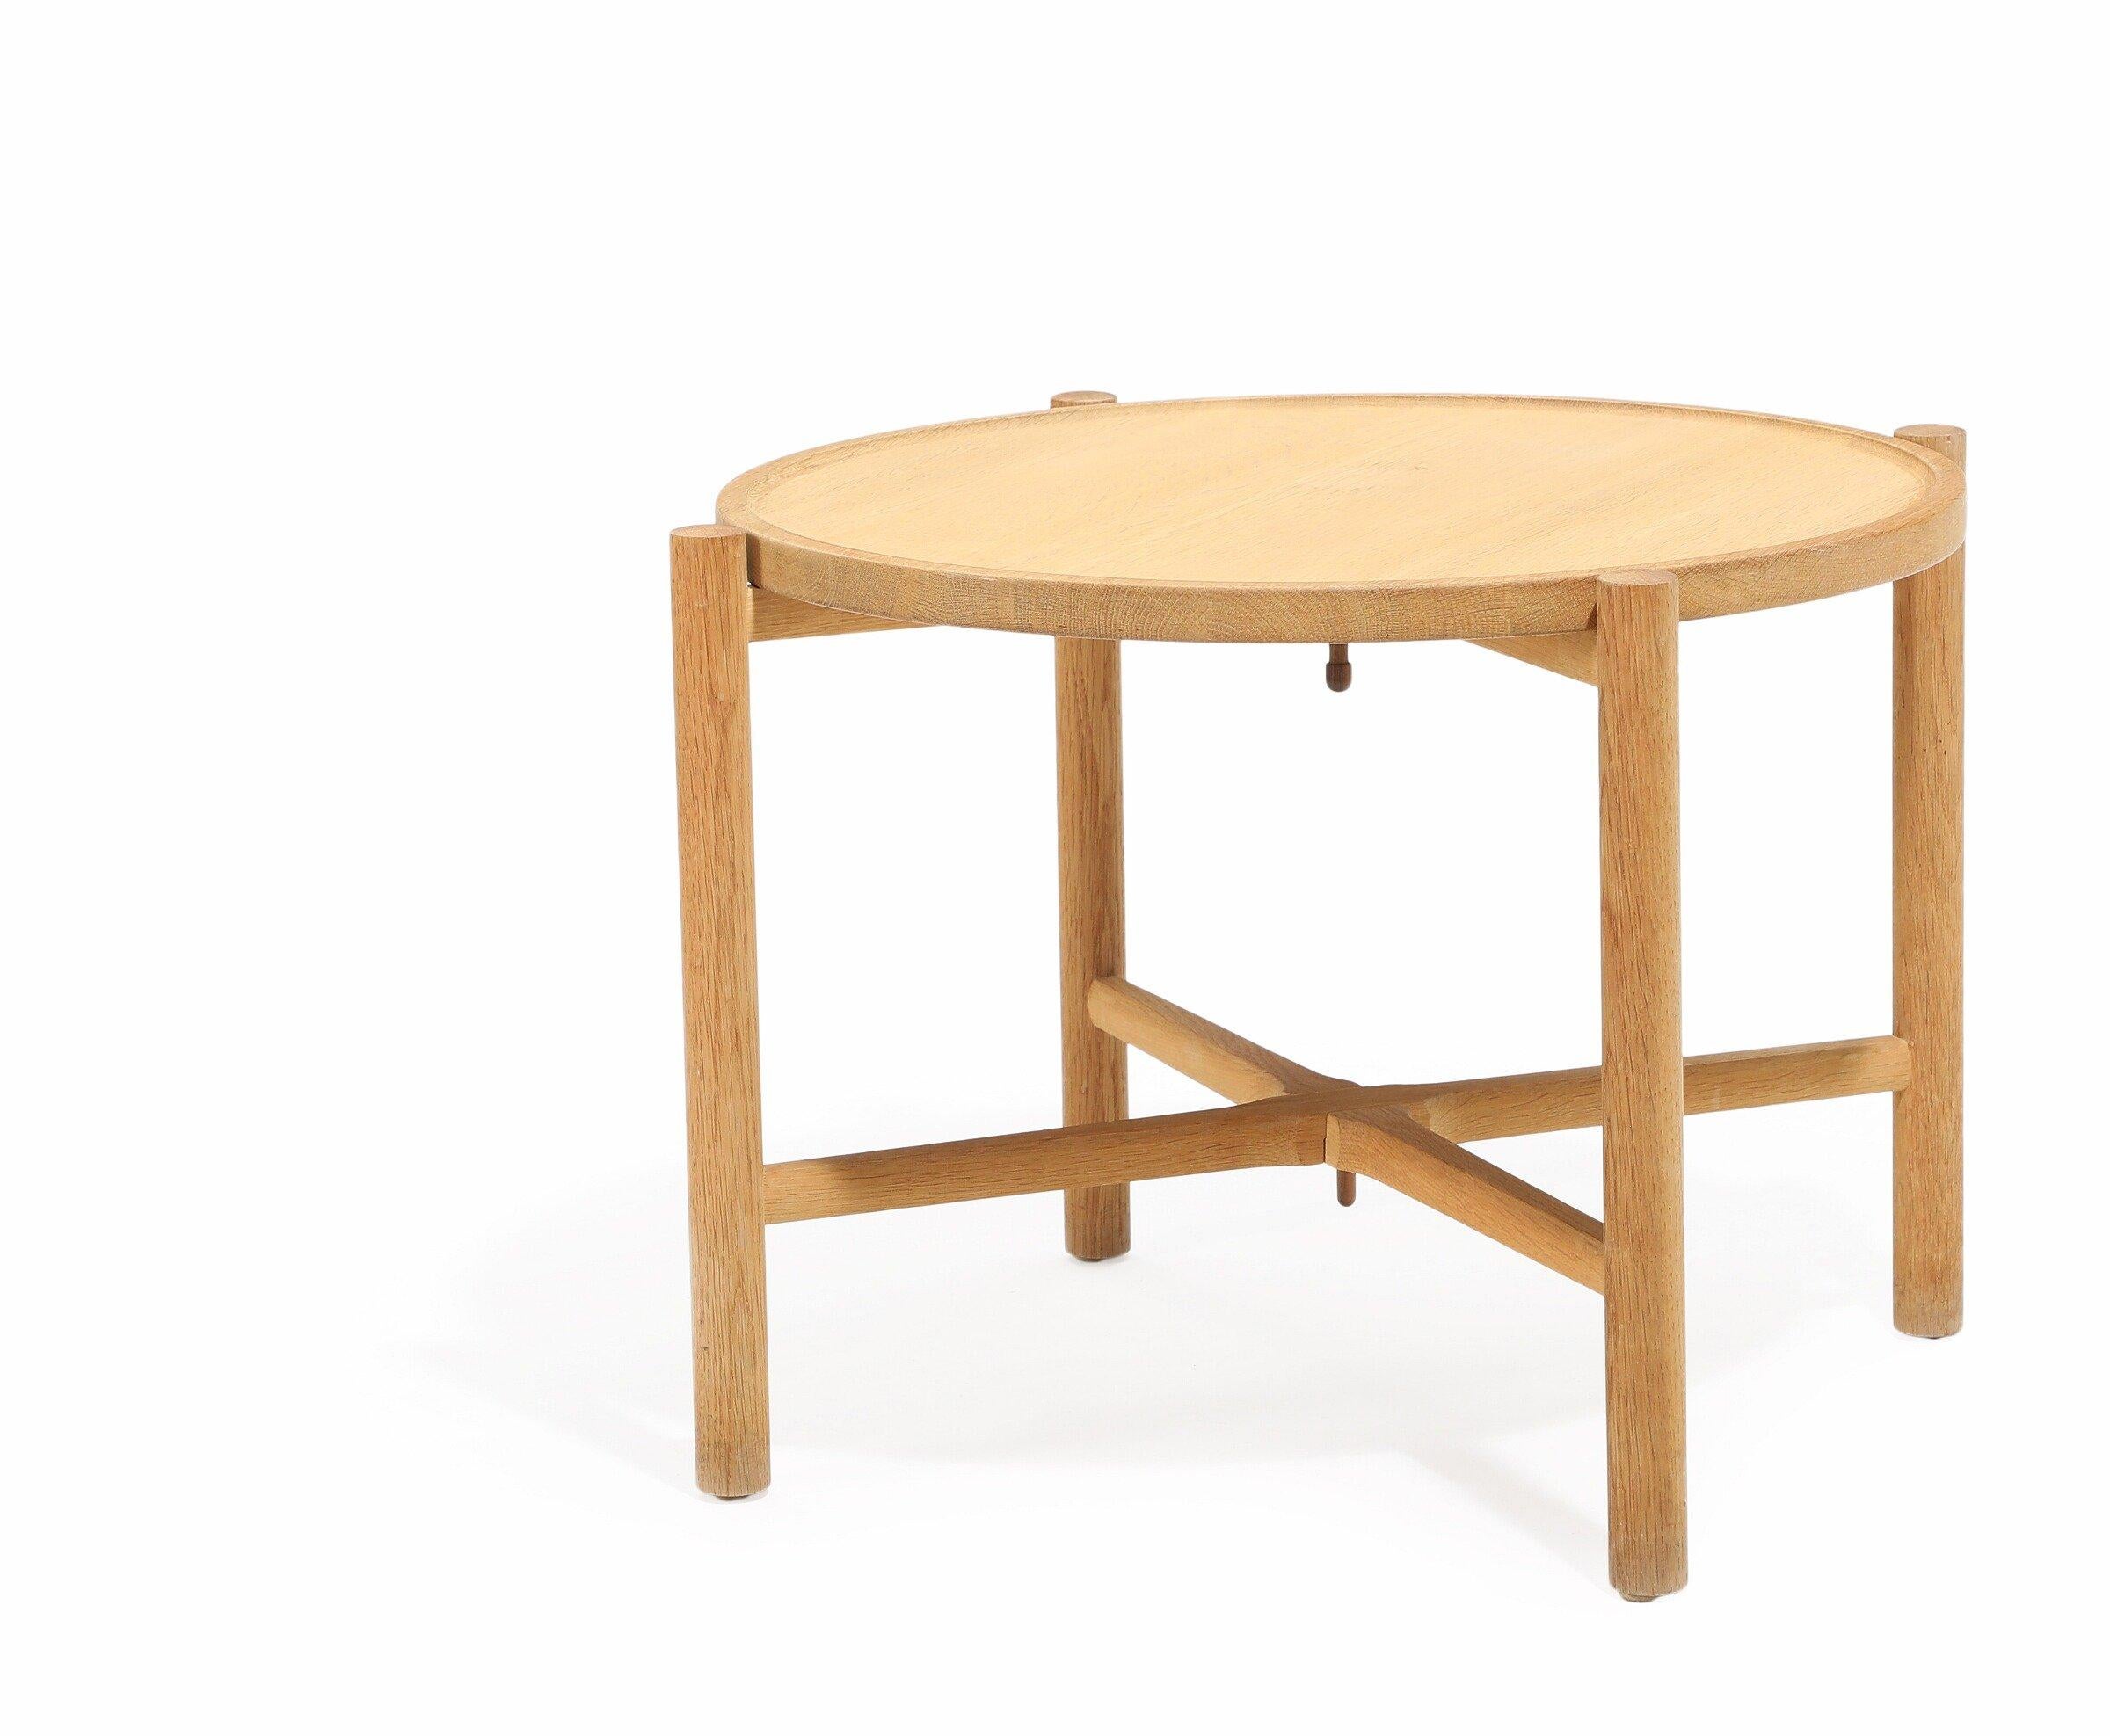 Description: PP35 - A solid oak tray table with circular, reversible top. Designed 1945. Manufactured and marked by PP Møbler.
Designer: Hans J. Wegner
Dimensions: 27.5